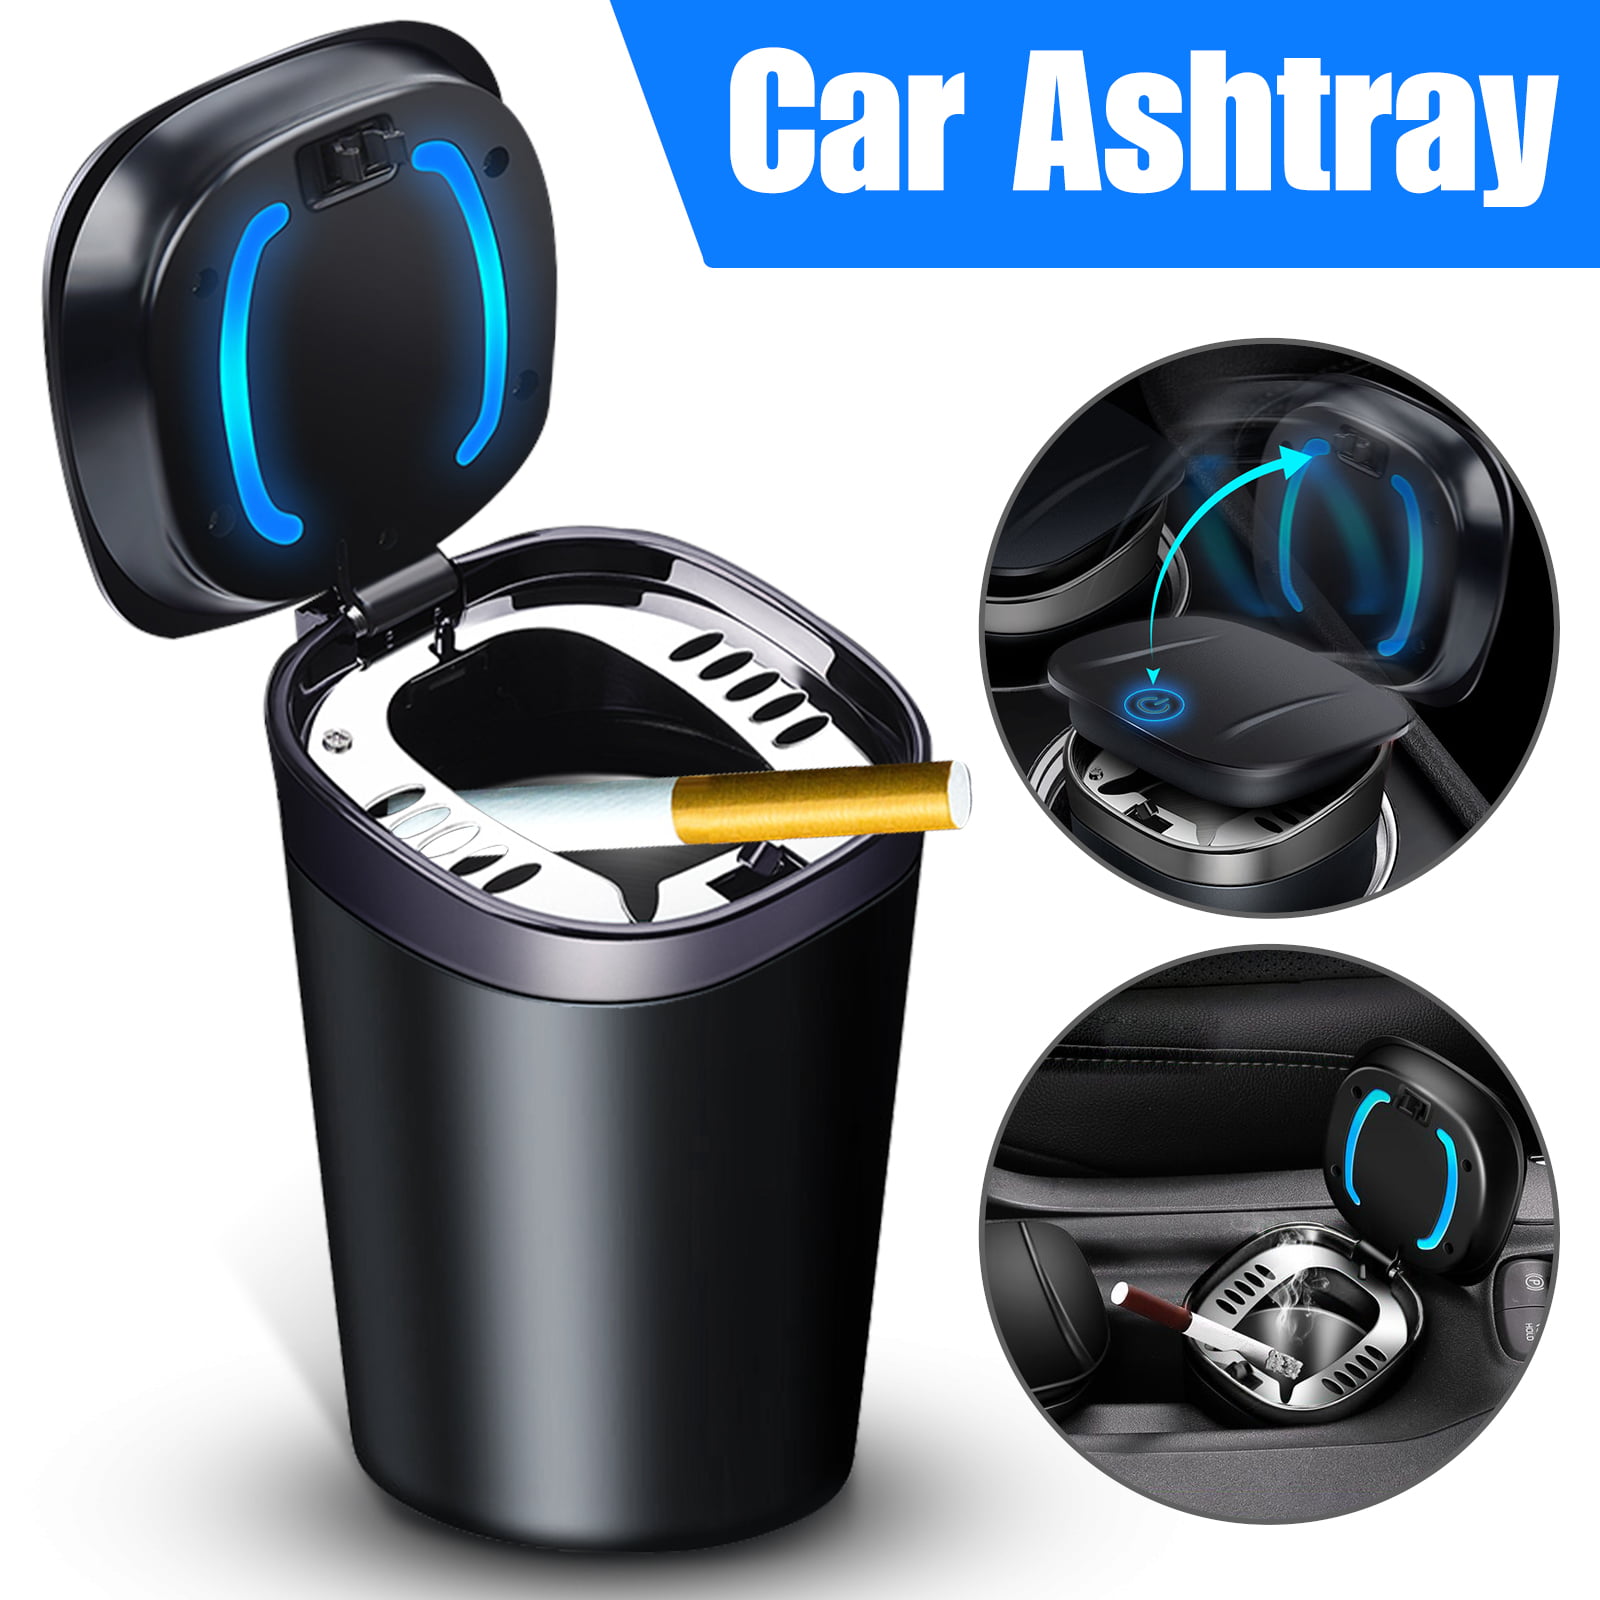 TAKAVU RR-2-3-1 Car Ashtray Easy Clean Up Detachable Stainless Car Ashtray with Lid Blue Led Light and Removable Lighter for Most Car Cup Holder Silver